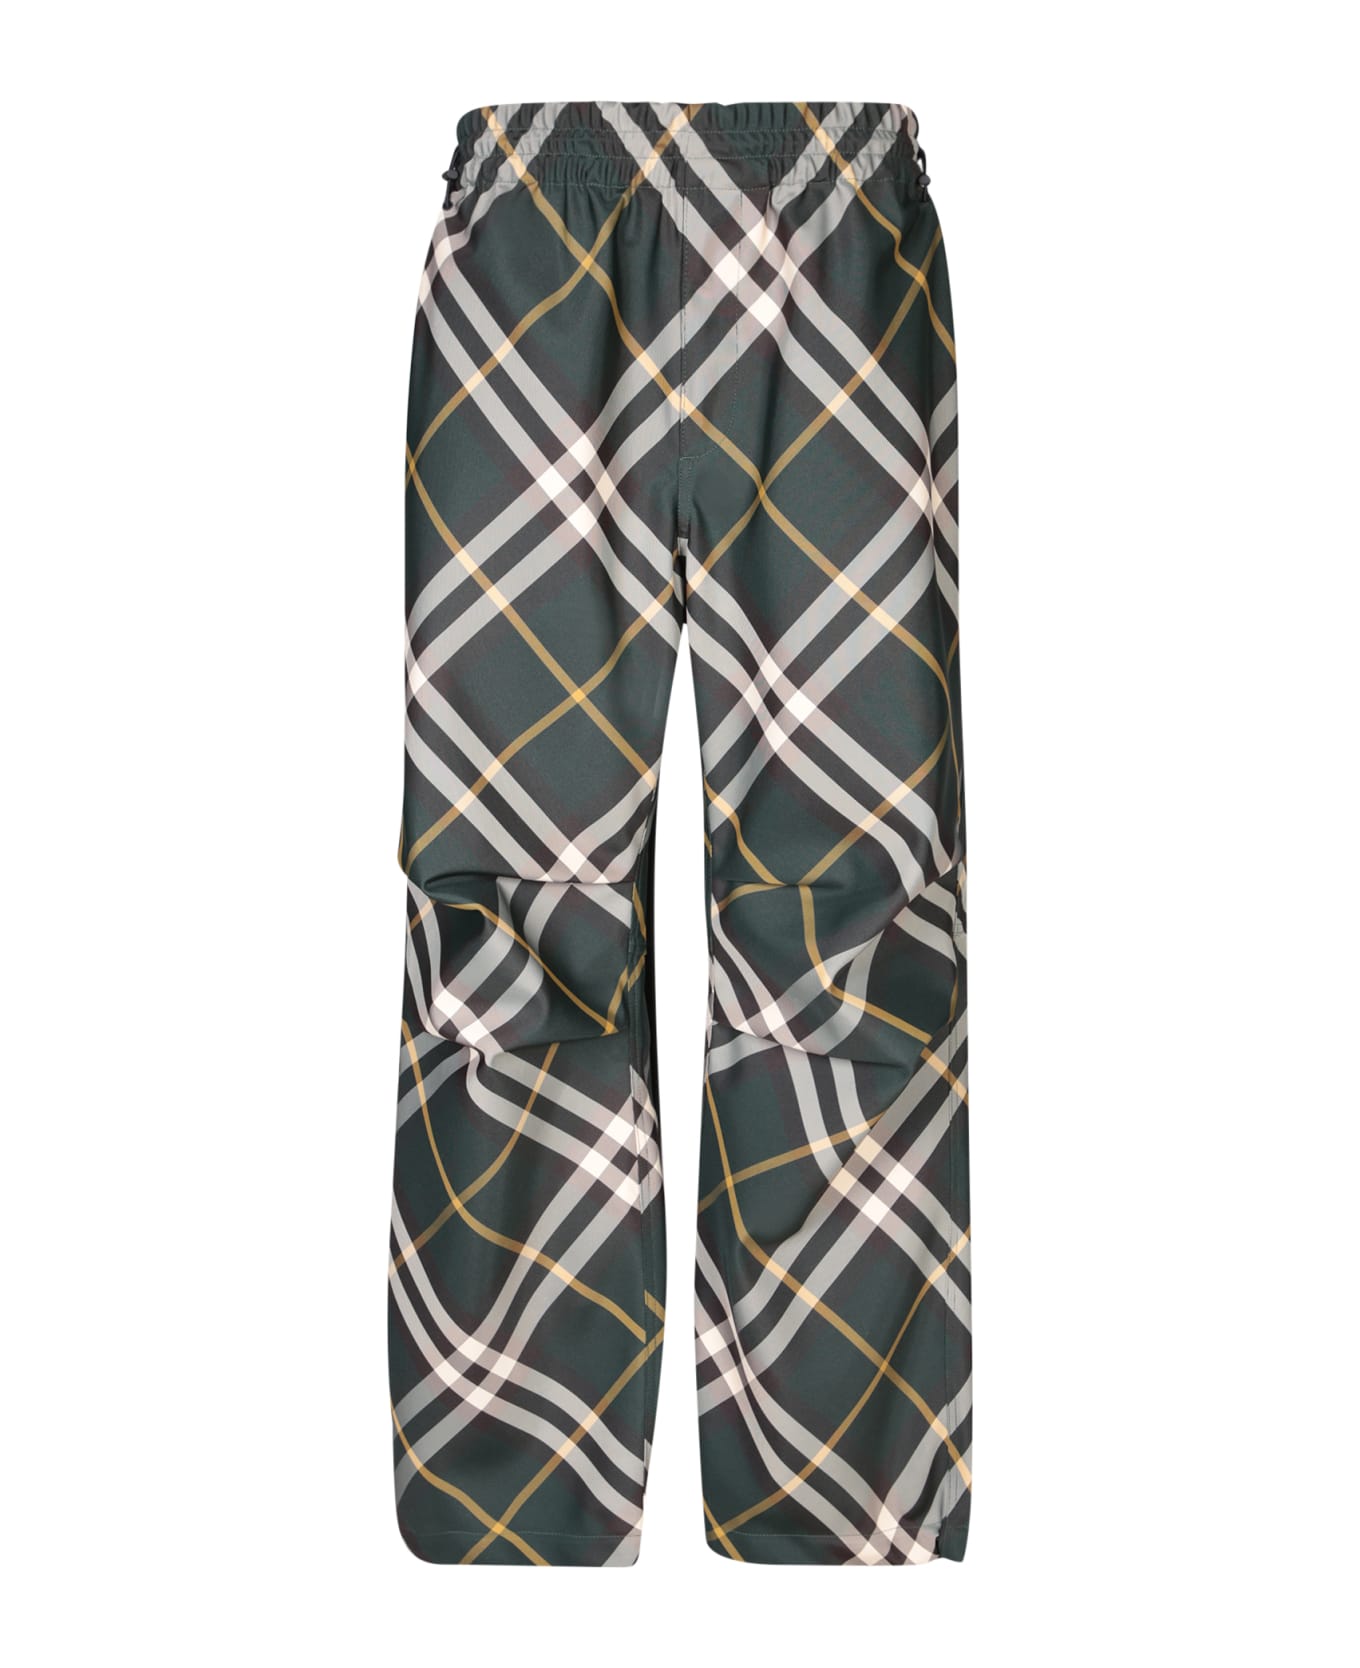 Burberry Wide-leg Equestrian Knight Motif Checked Trousers - Green